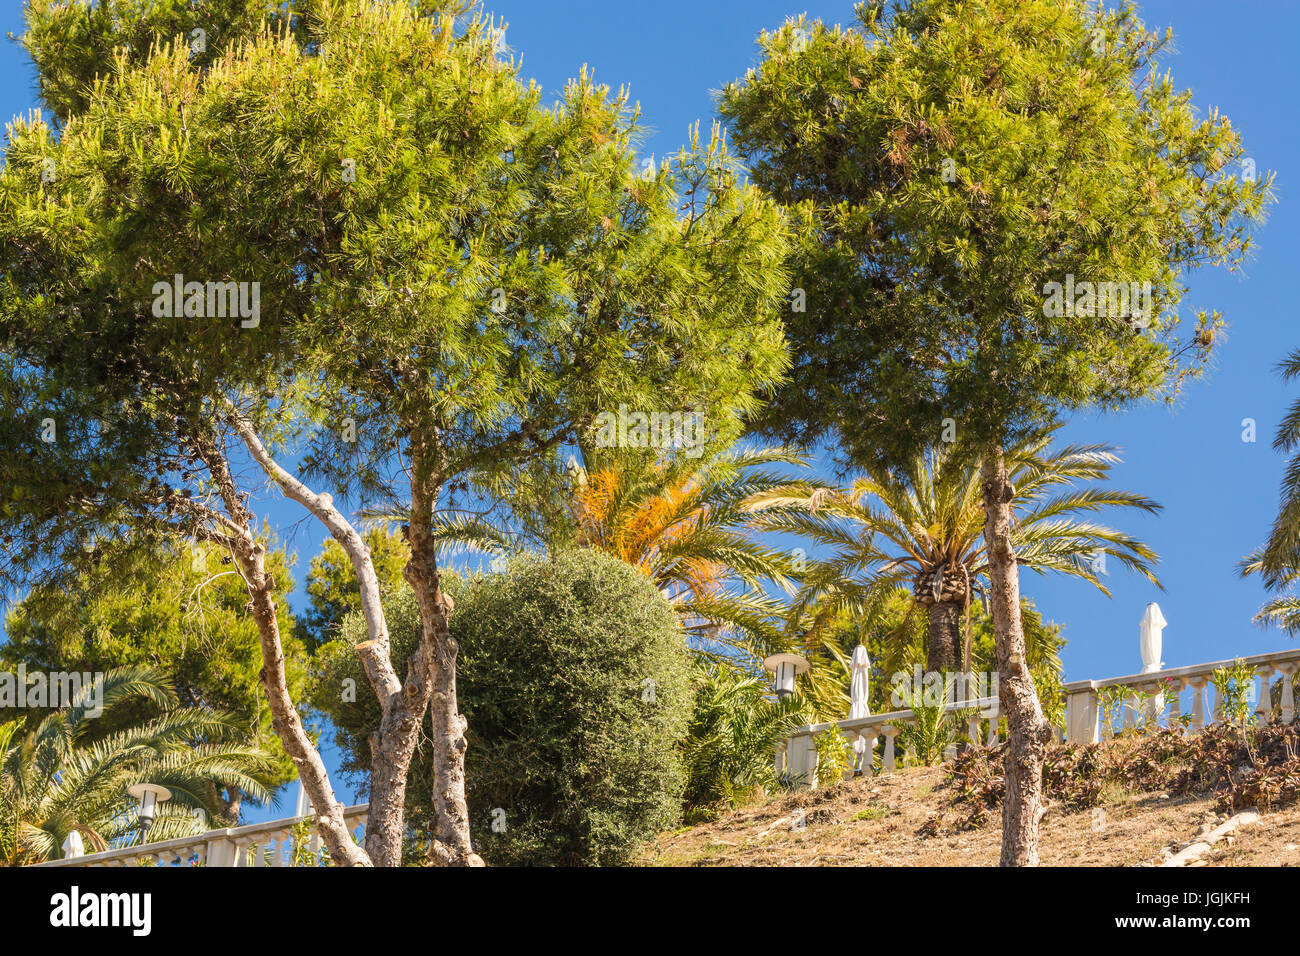 Palm and pine trees against a blue sky. Stock Photo